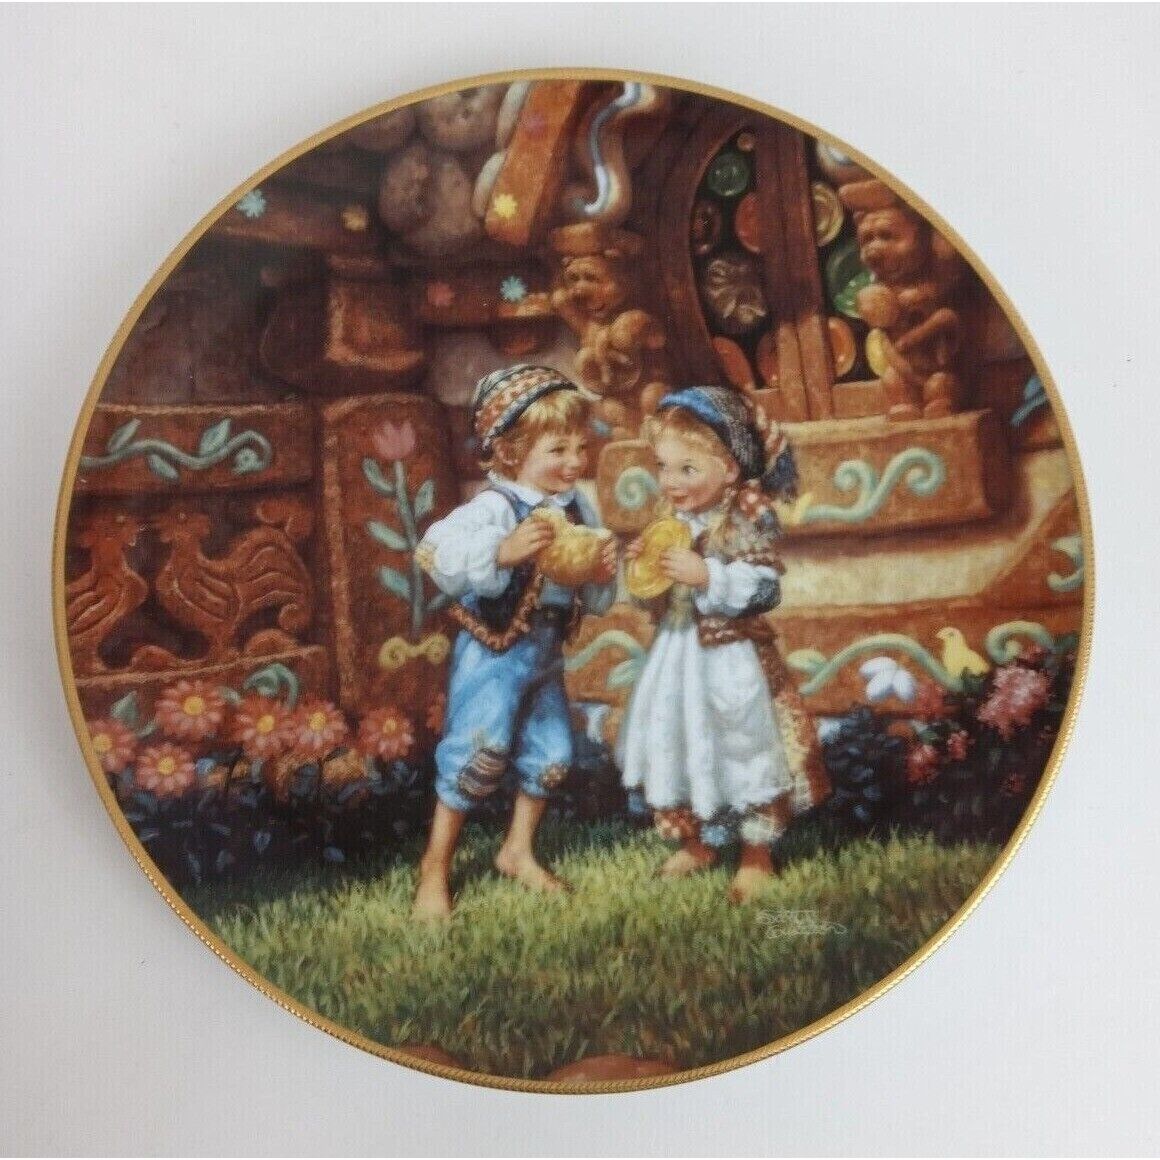 Primary image for Vintage 1992 Knowles Collector Plate "Hansel And Gretel" #3584B With COA